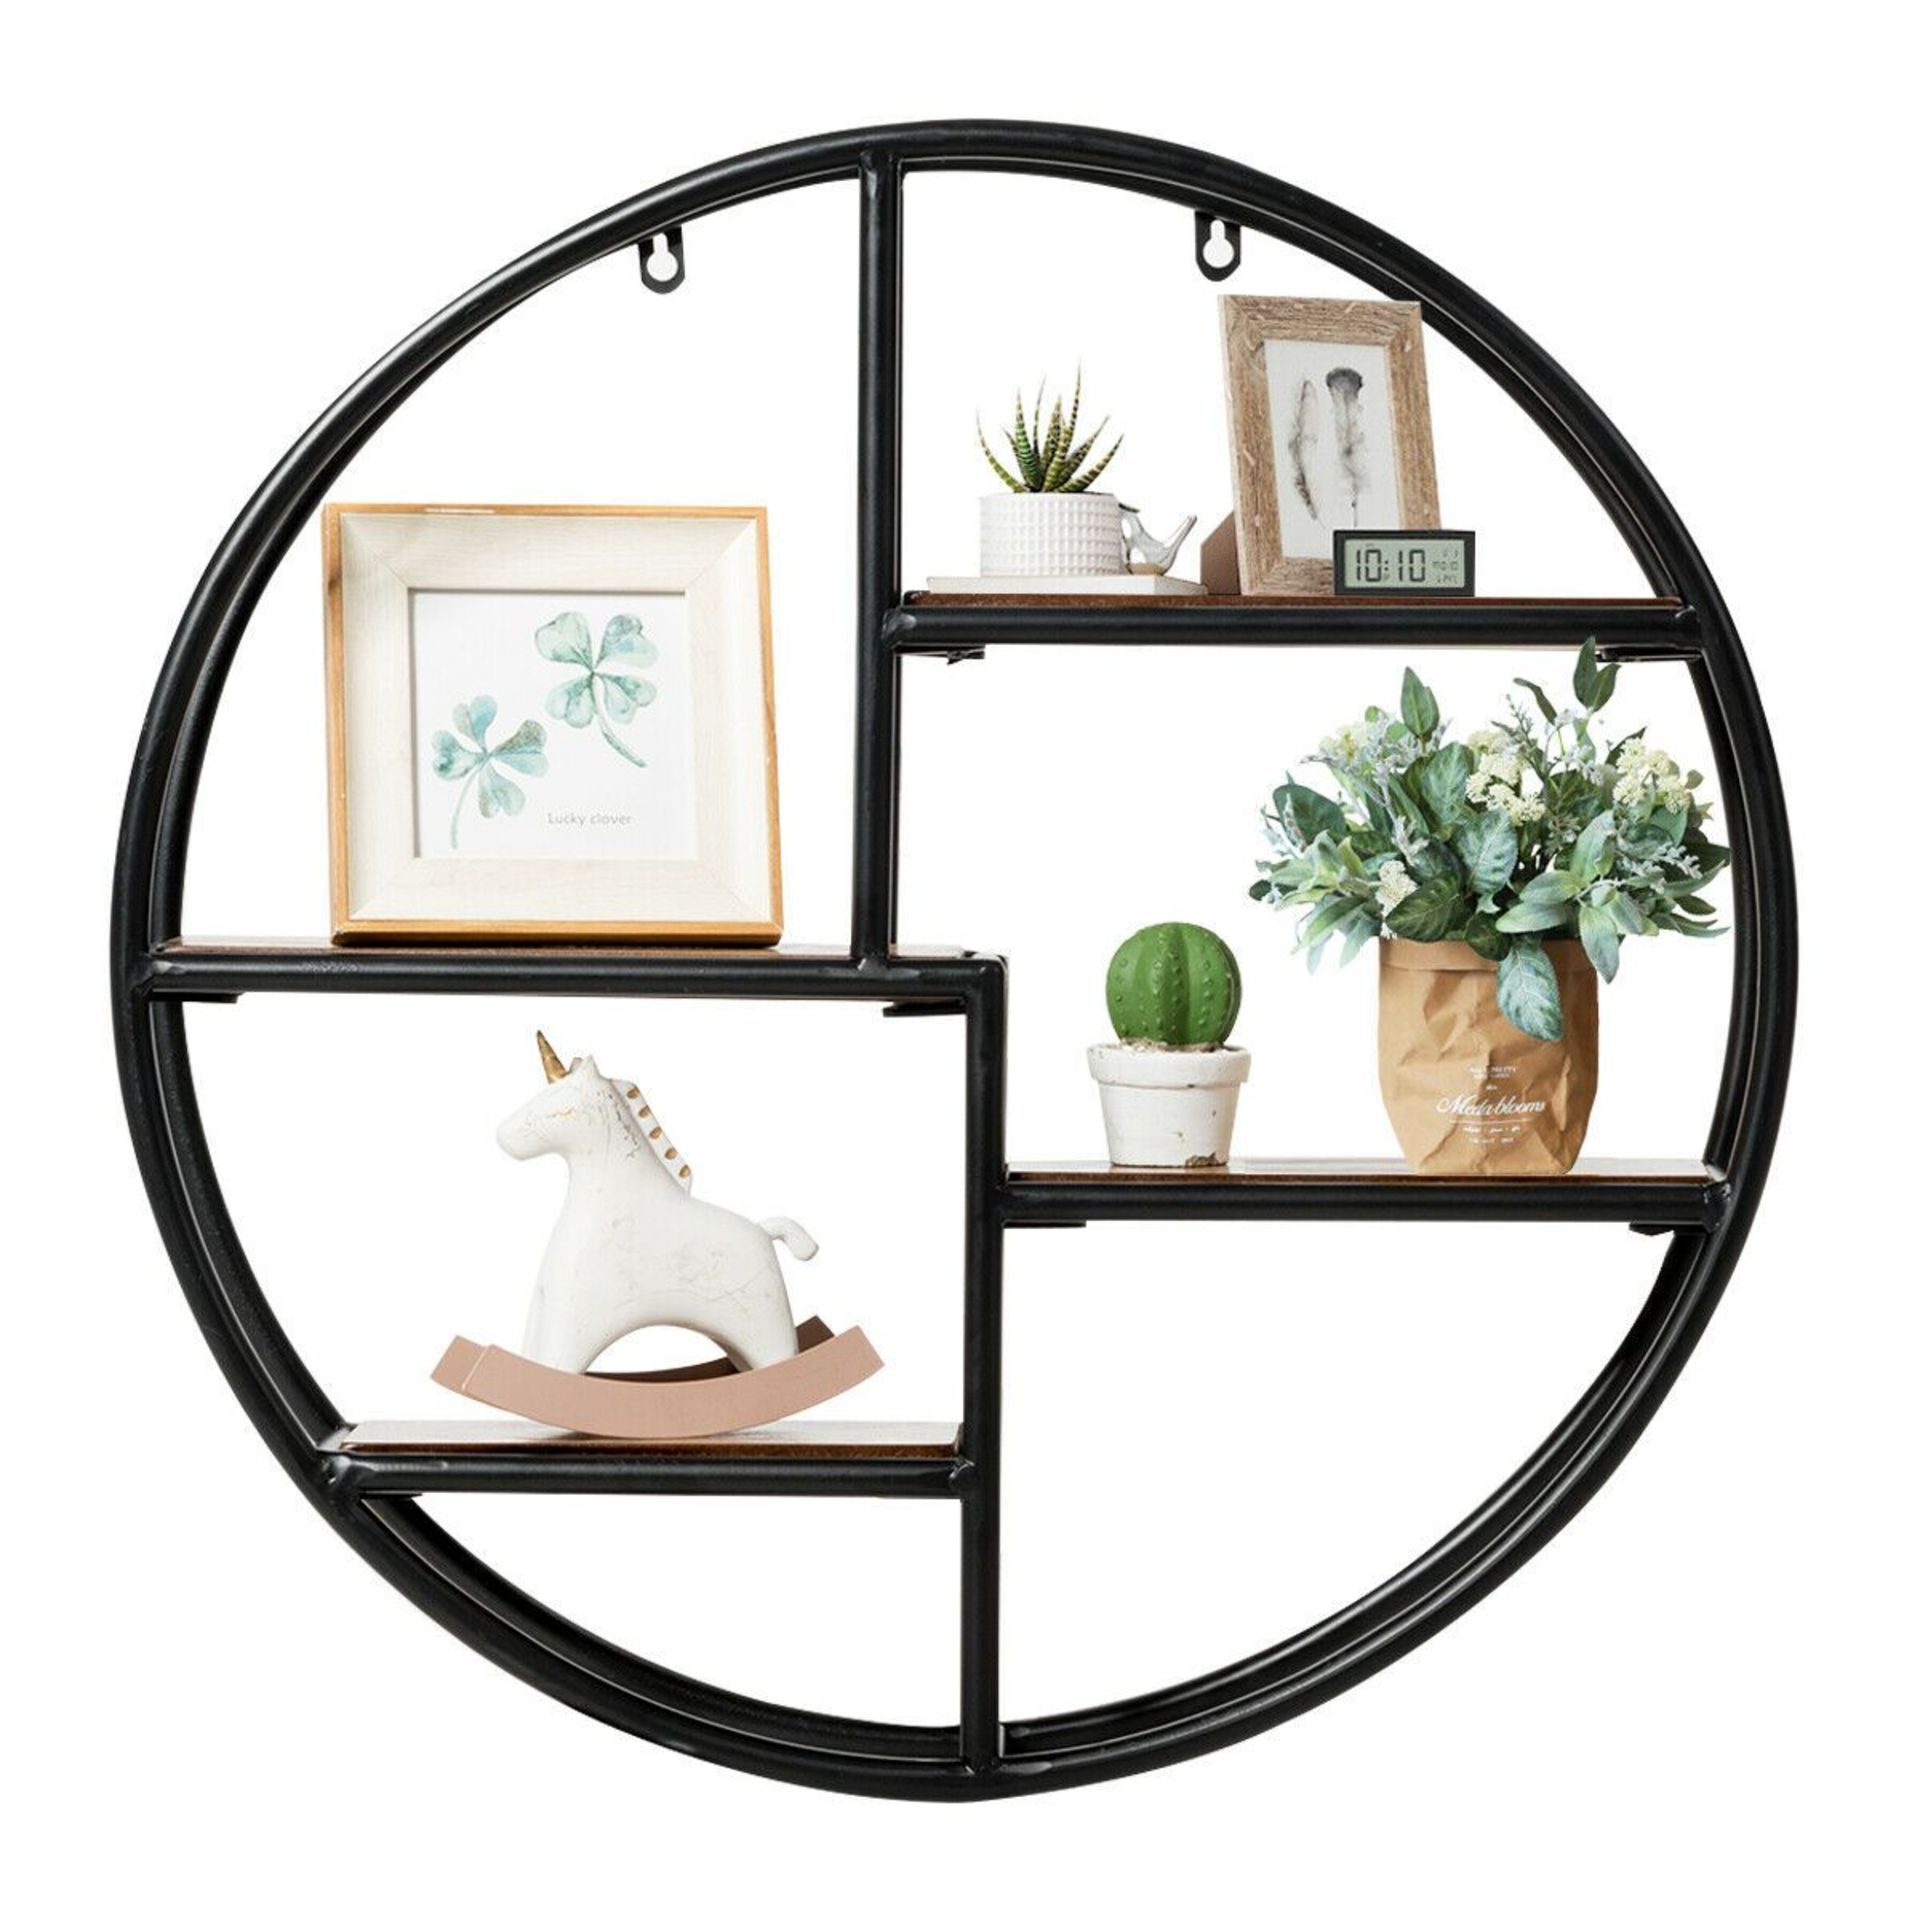 Round Multi-Section Shelf. This contemporary wall-mounted shelving unit is a functional yet eye-